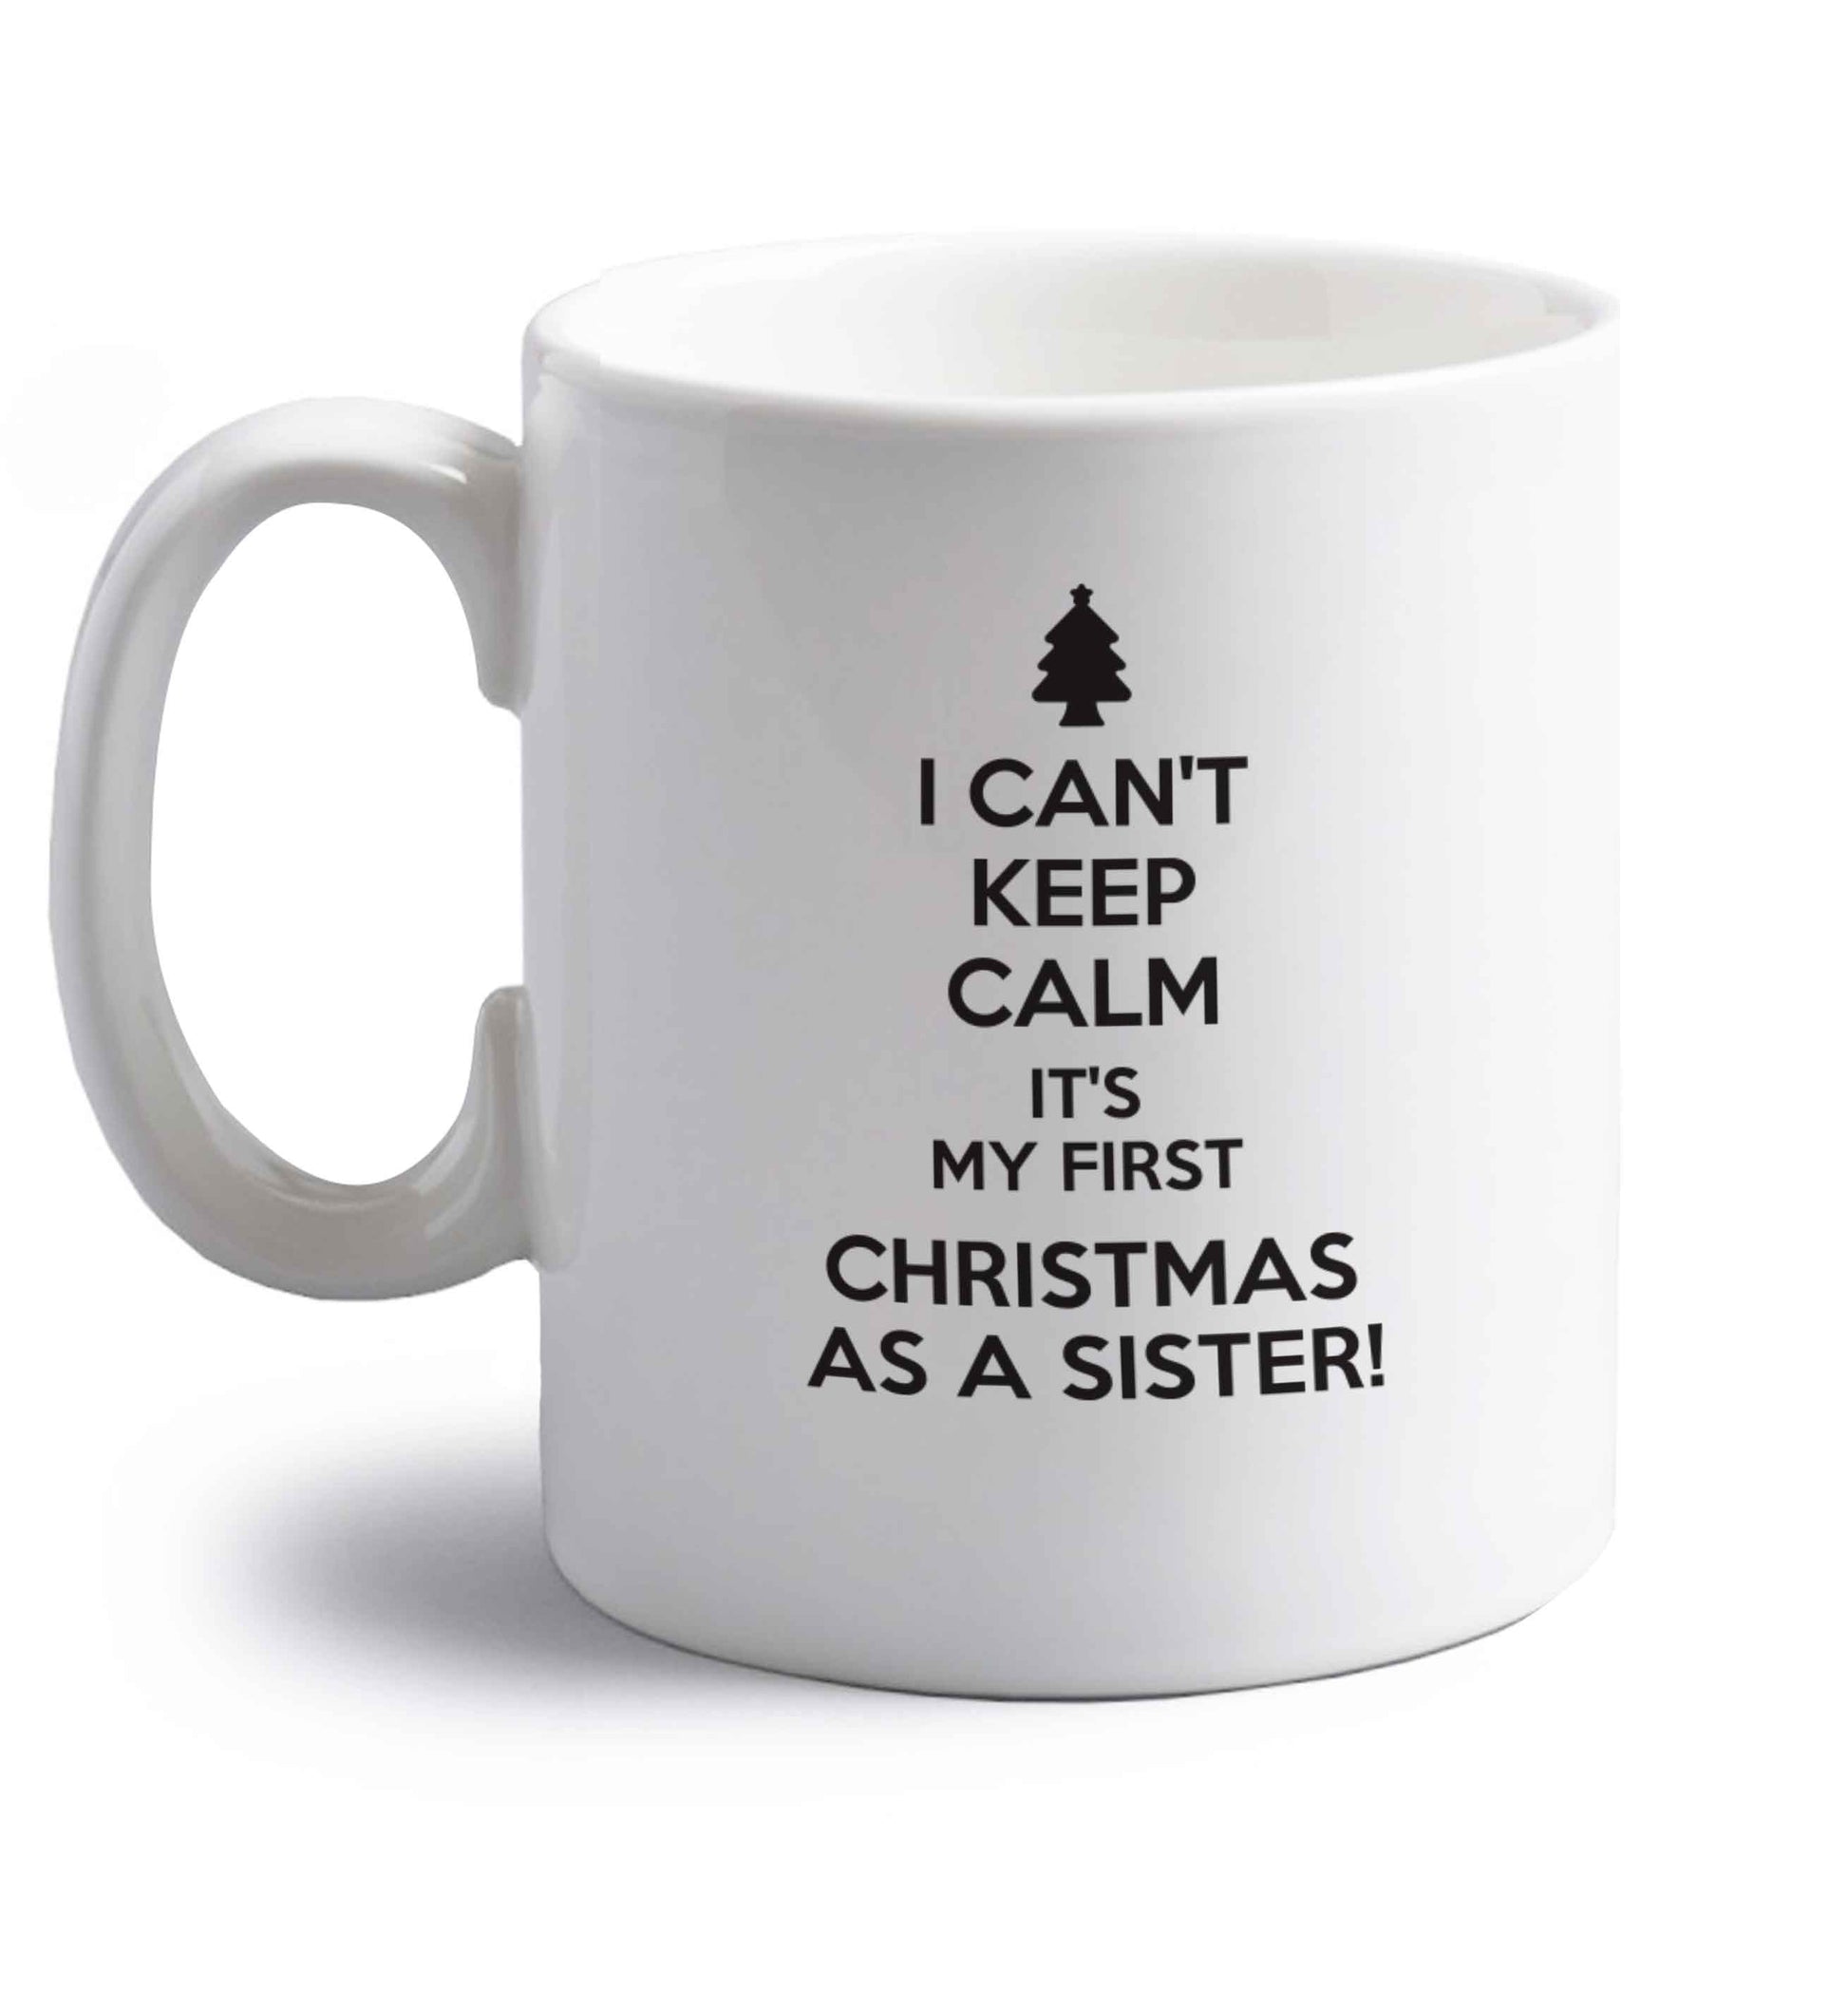 I can't keep calm it's my first Christmas as a sister! right handed white ceramic mug 